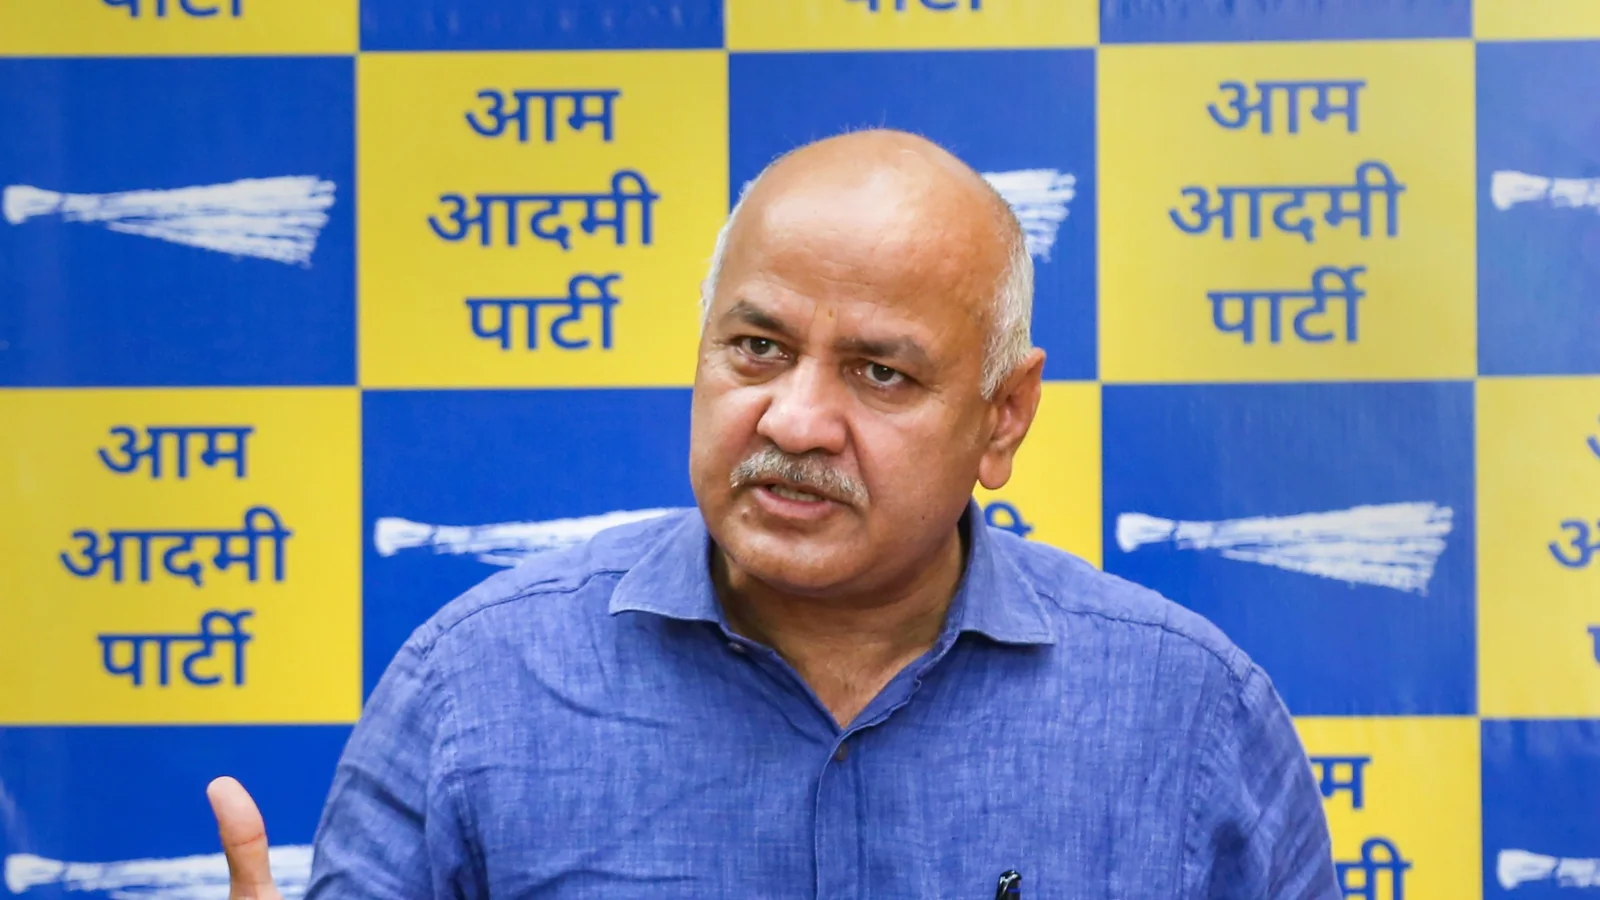 BJP wants to replace ‘failed’ Himachal CM Jairam Thakur with Union minister: Sisodia